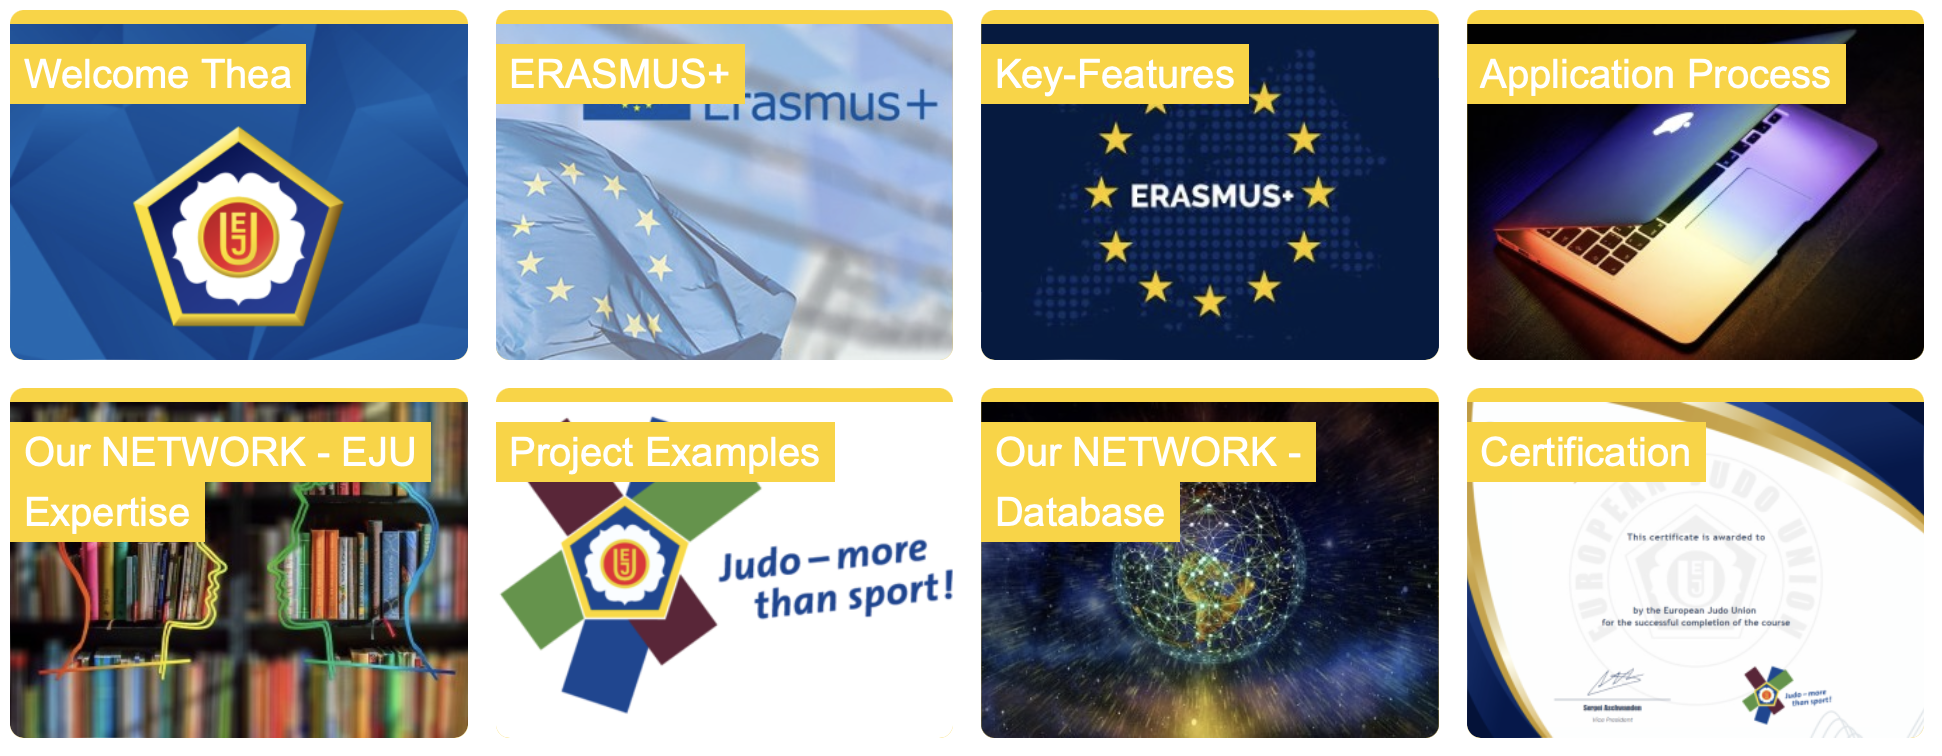 How to: ERASMUS+ E-Learning Course